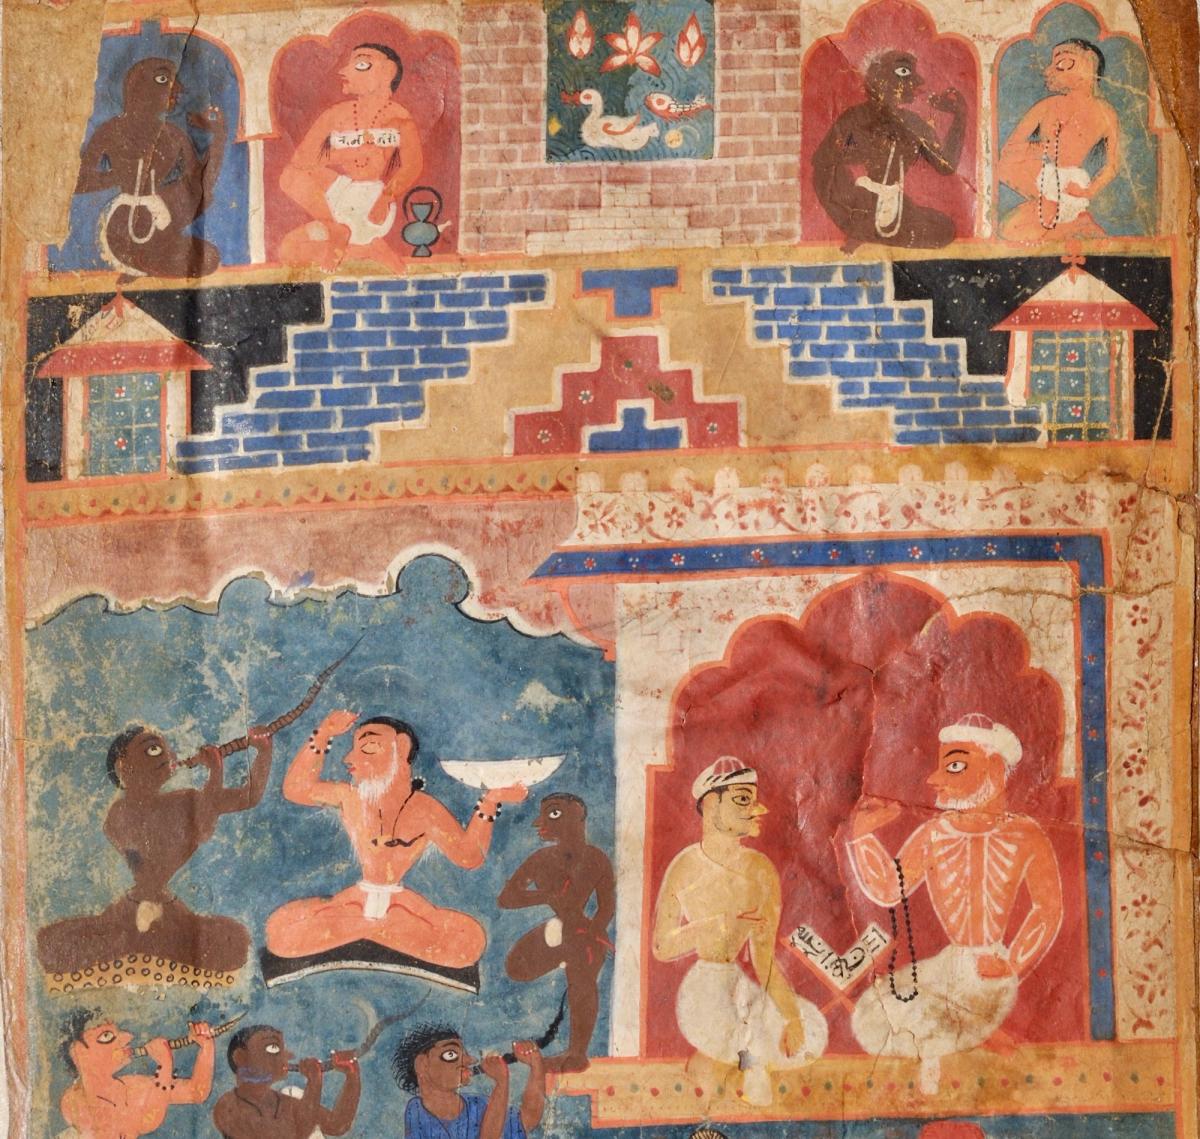 Detail showing Arabic script of Chandayan on a bookstand in the author portrait in bottom right, and a yogi shown with a mantra in kaithi script in the top left. Images of text pages available here. Reproduced with permission of the Government Museum and Art Gallery, Chandigarh, K-7-30-H. 